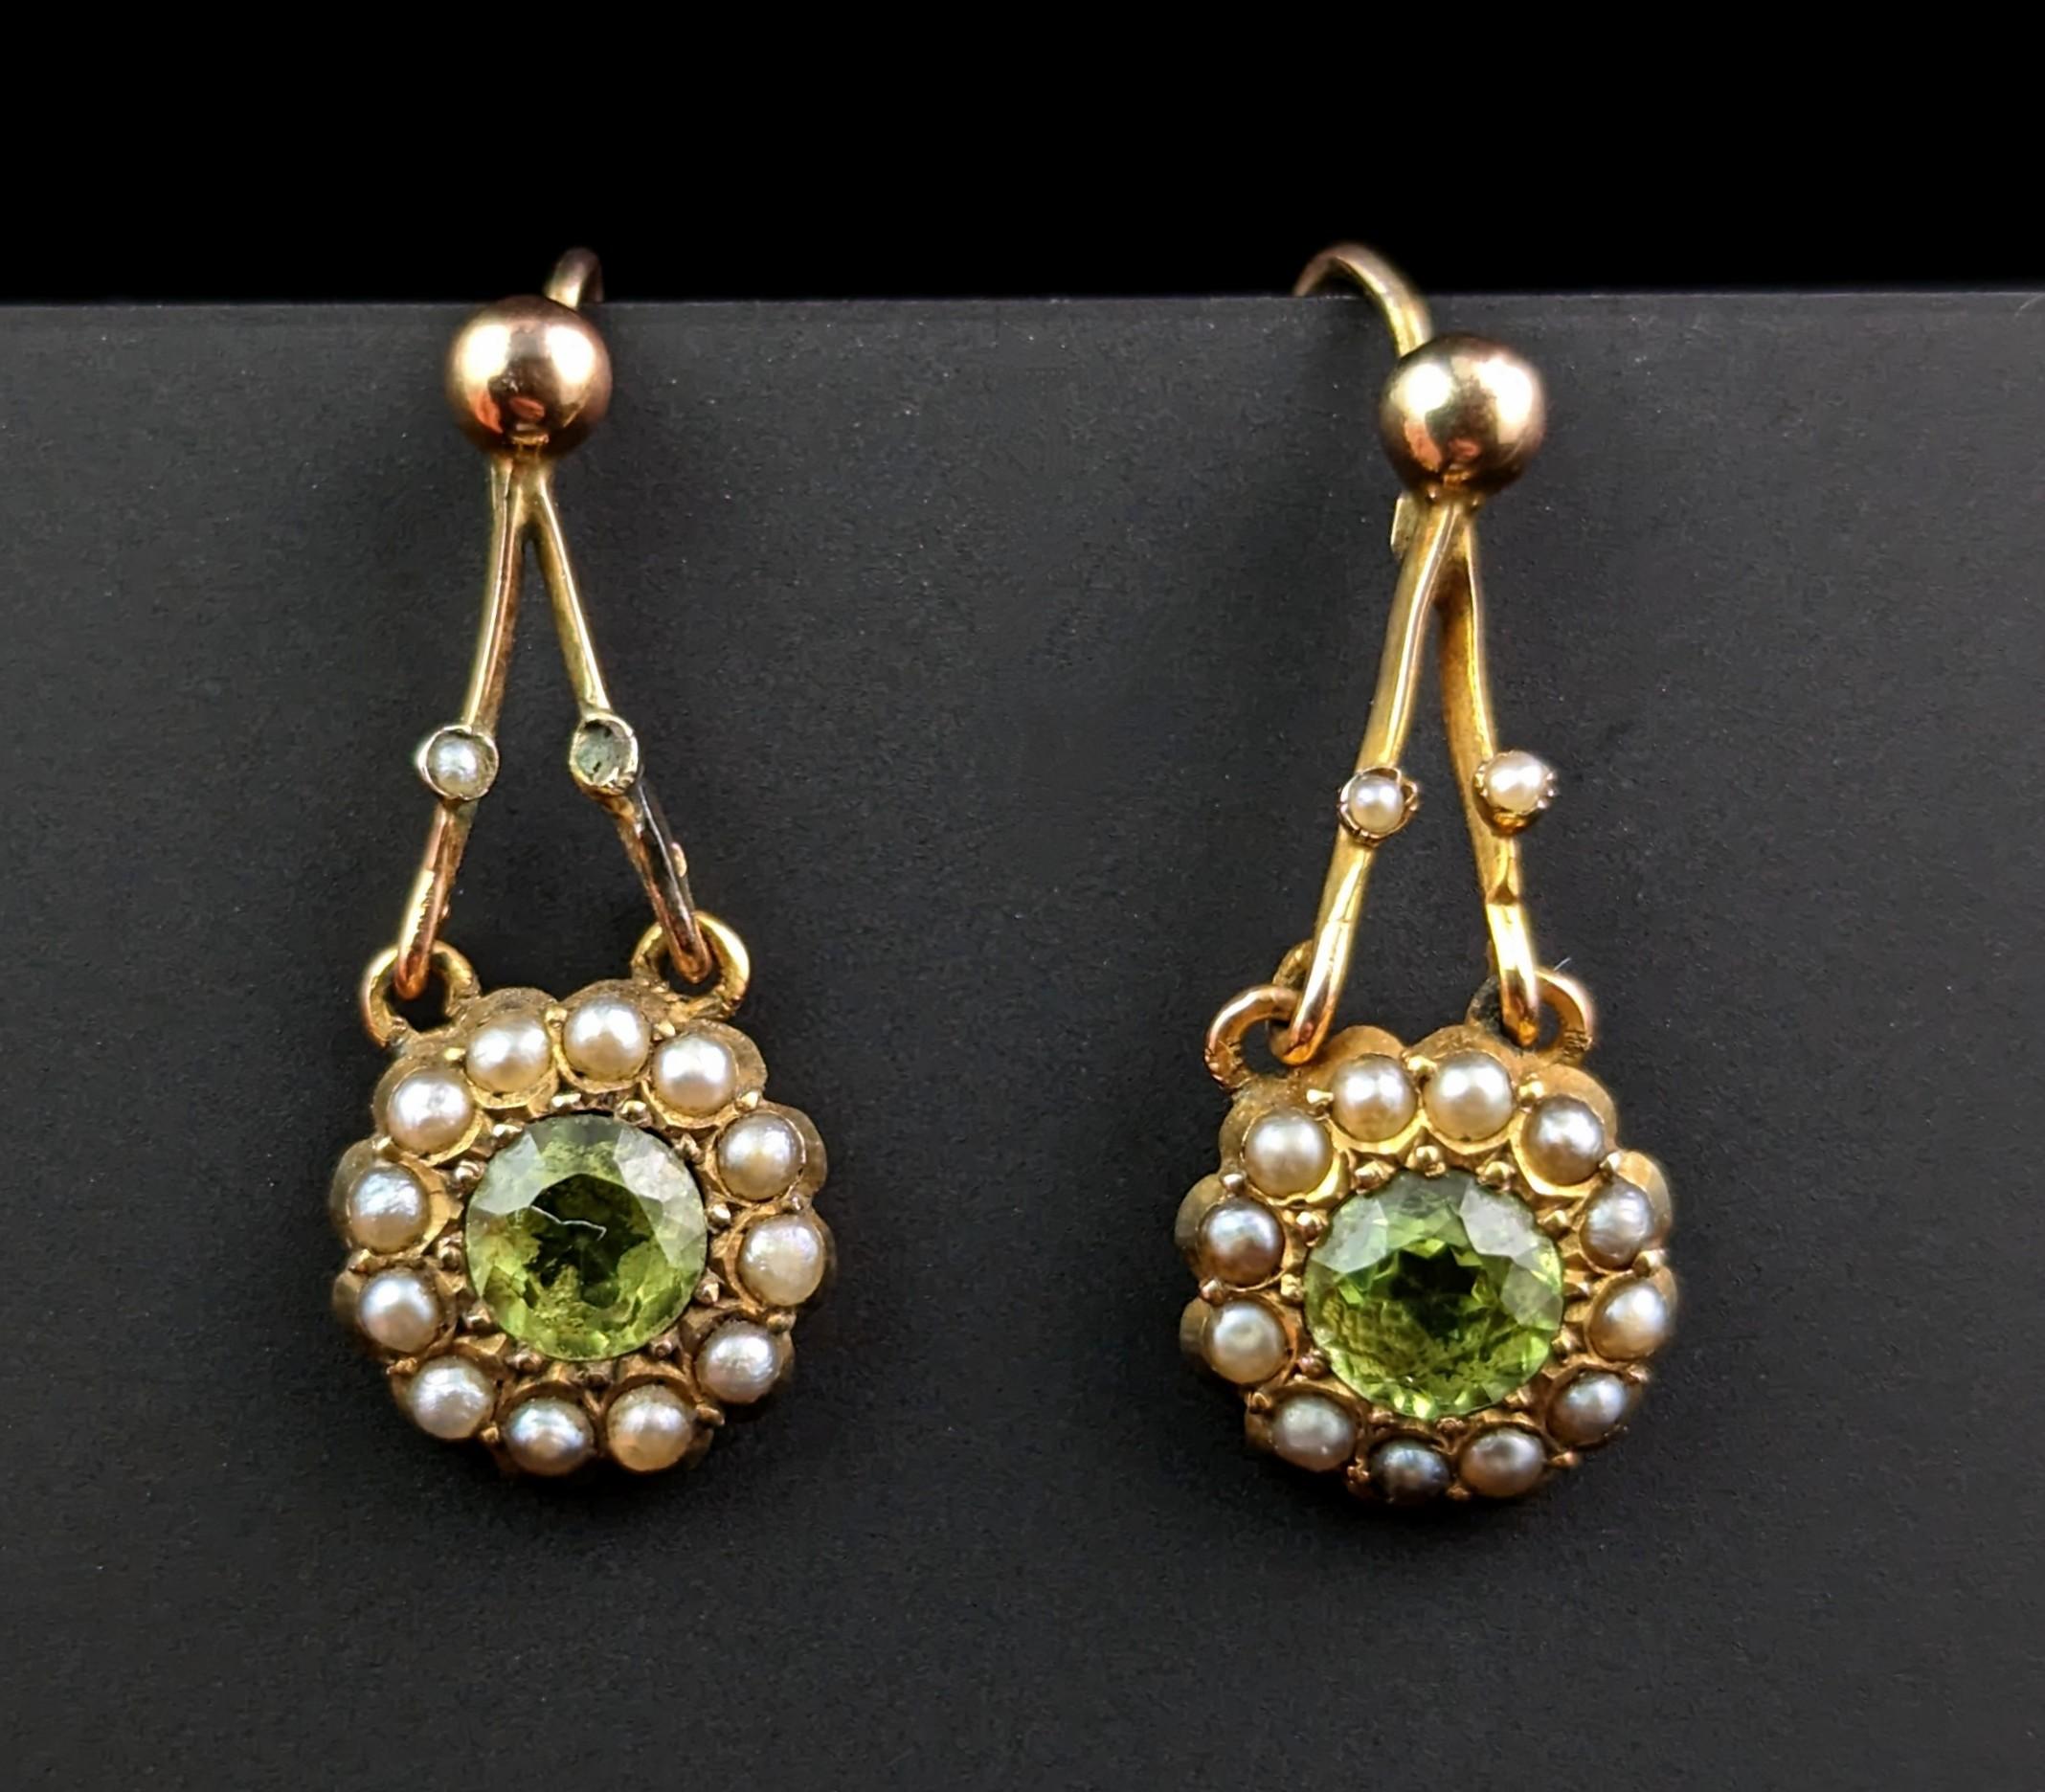 These antique Edwardian earrings are simply charming!

Crafted in rich 9ct yellow gold, they are a designed with an A frame drop from the top of the ear wire, the cluster hinged from the bottom.

The drop has two small seed pearls to each side